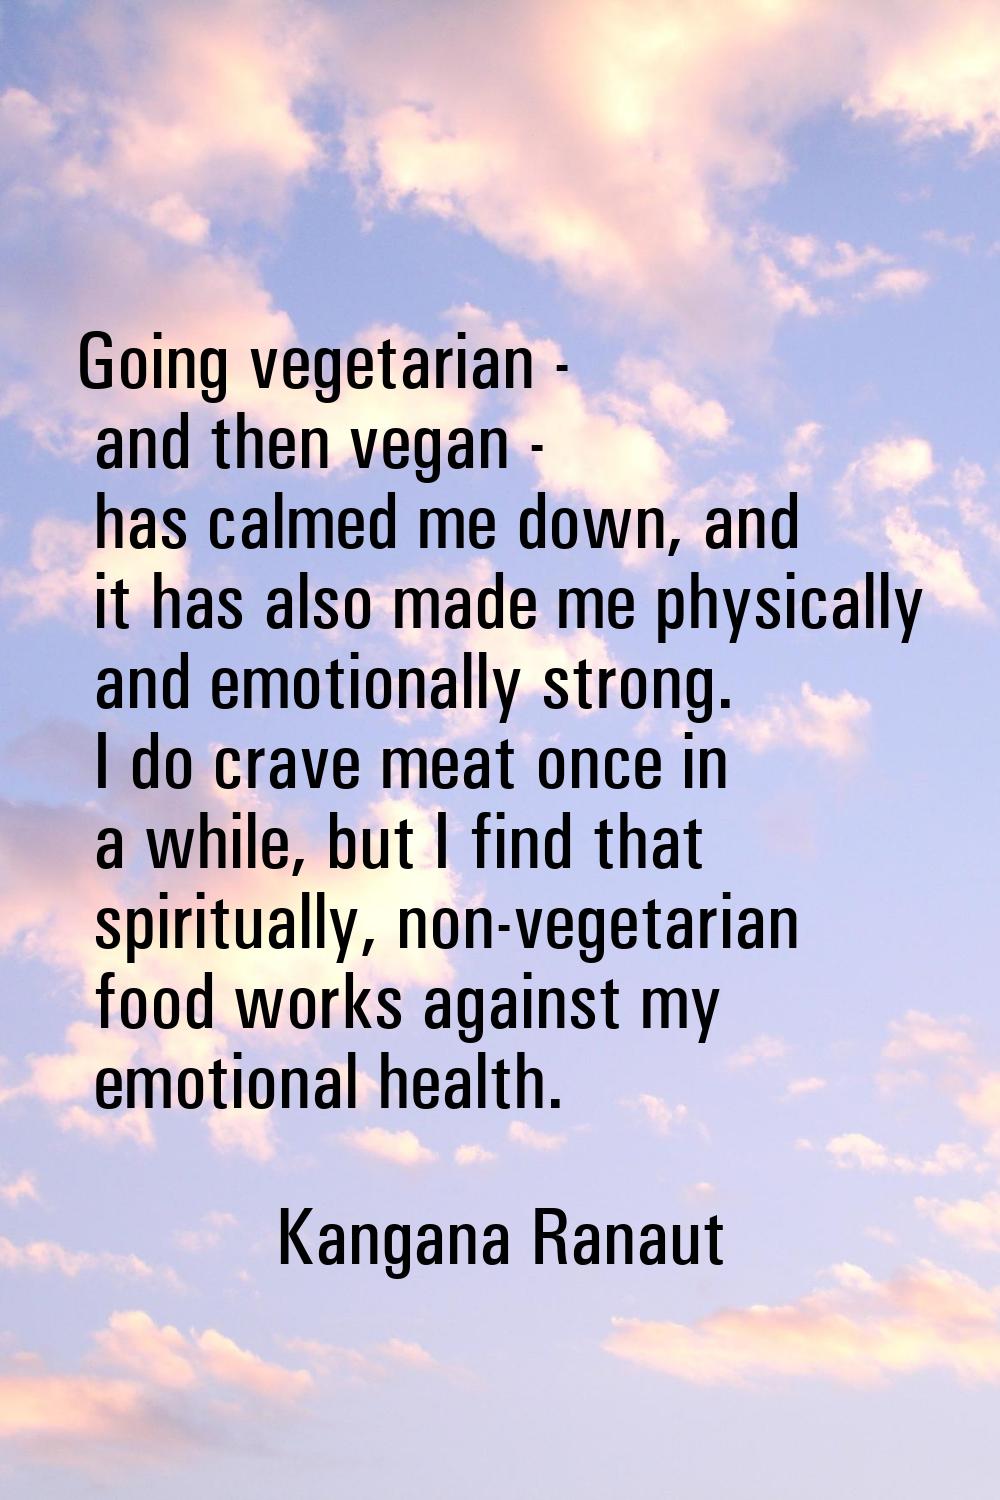 Going vegetarian - and then vegan - has calmed me down, and it has also made me physically and emot